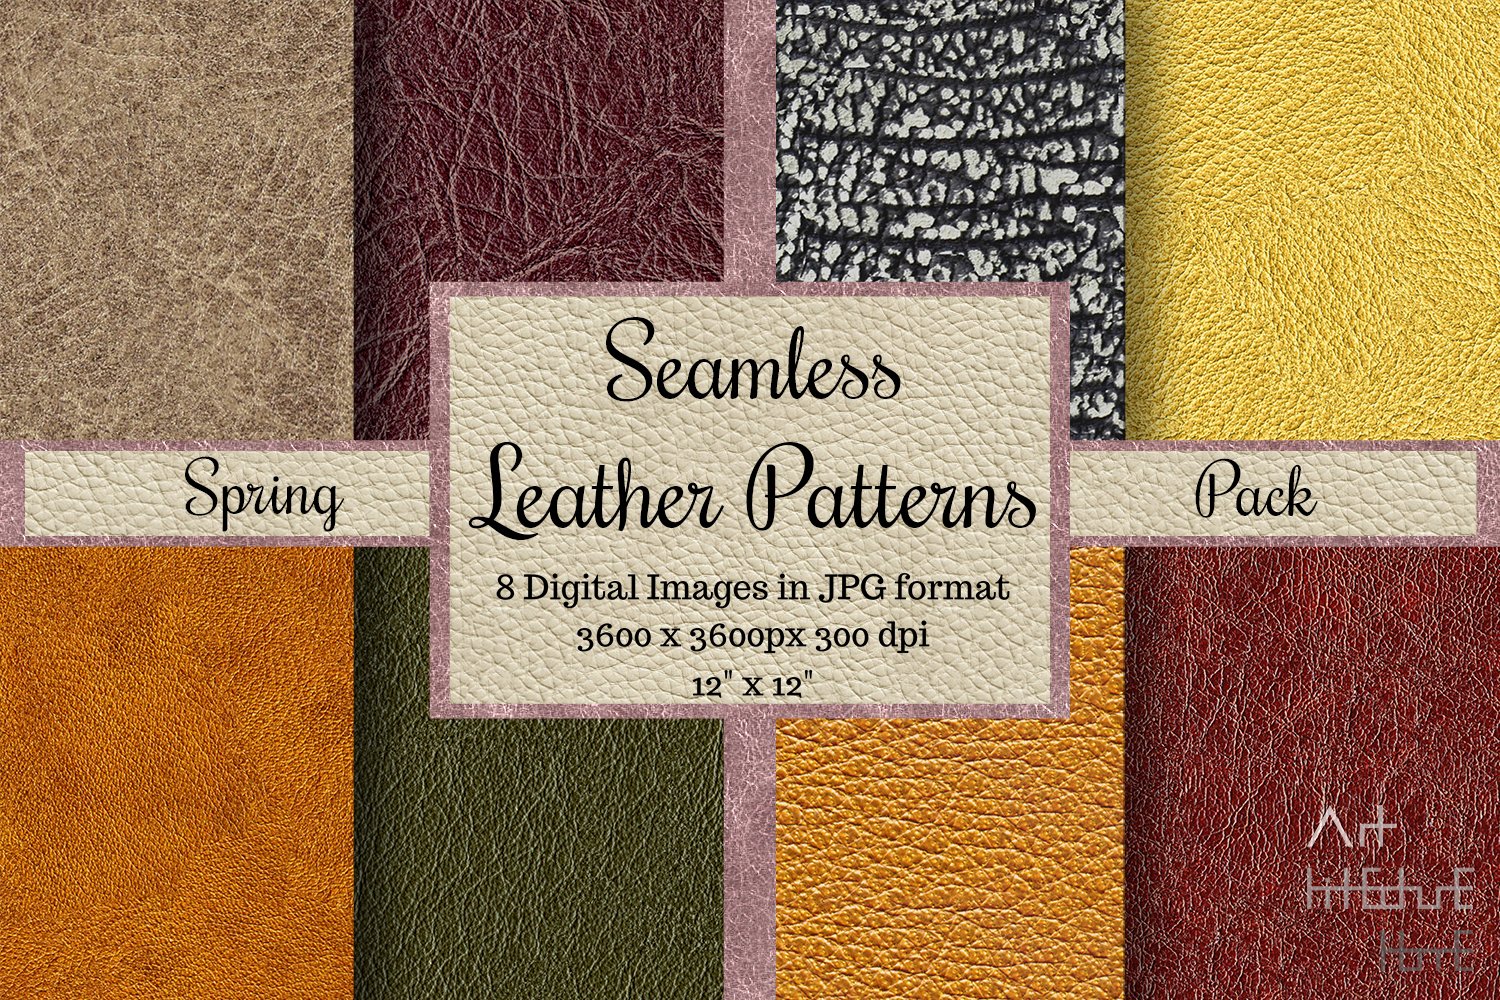 Seamless Leather Patterns - Spring cover image.